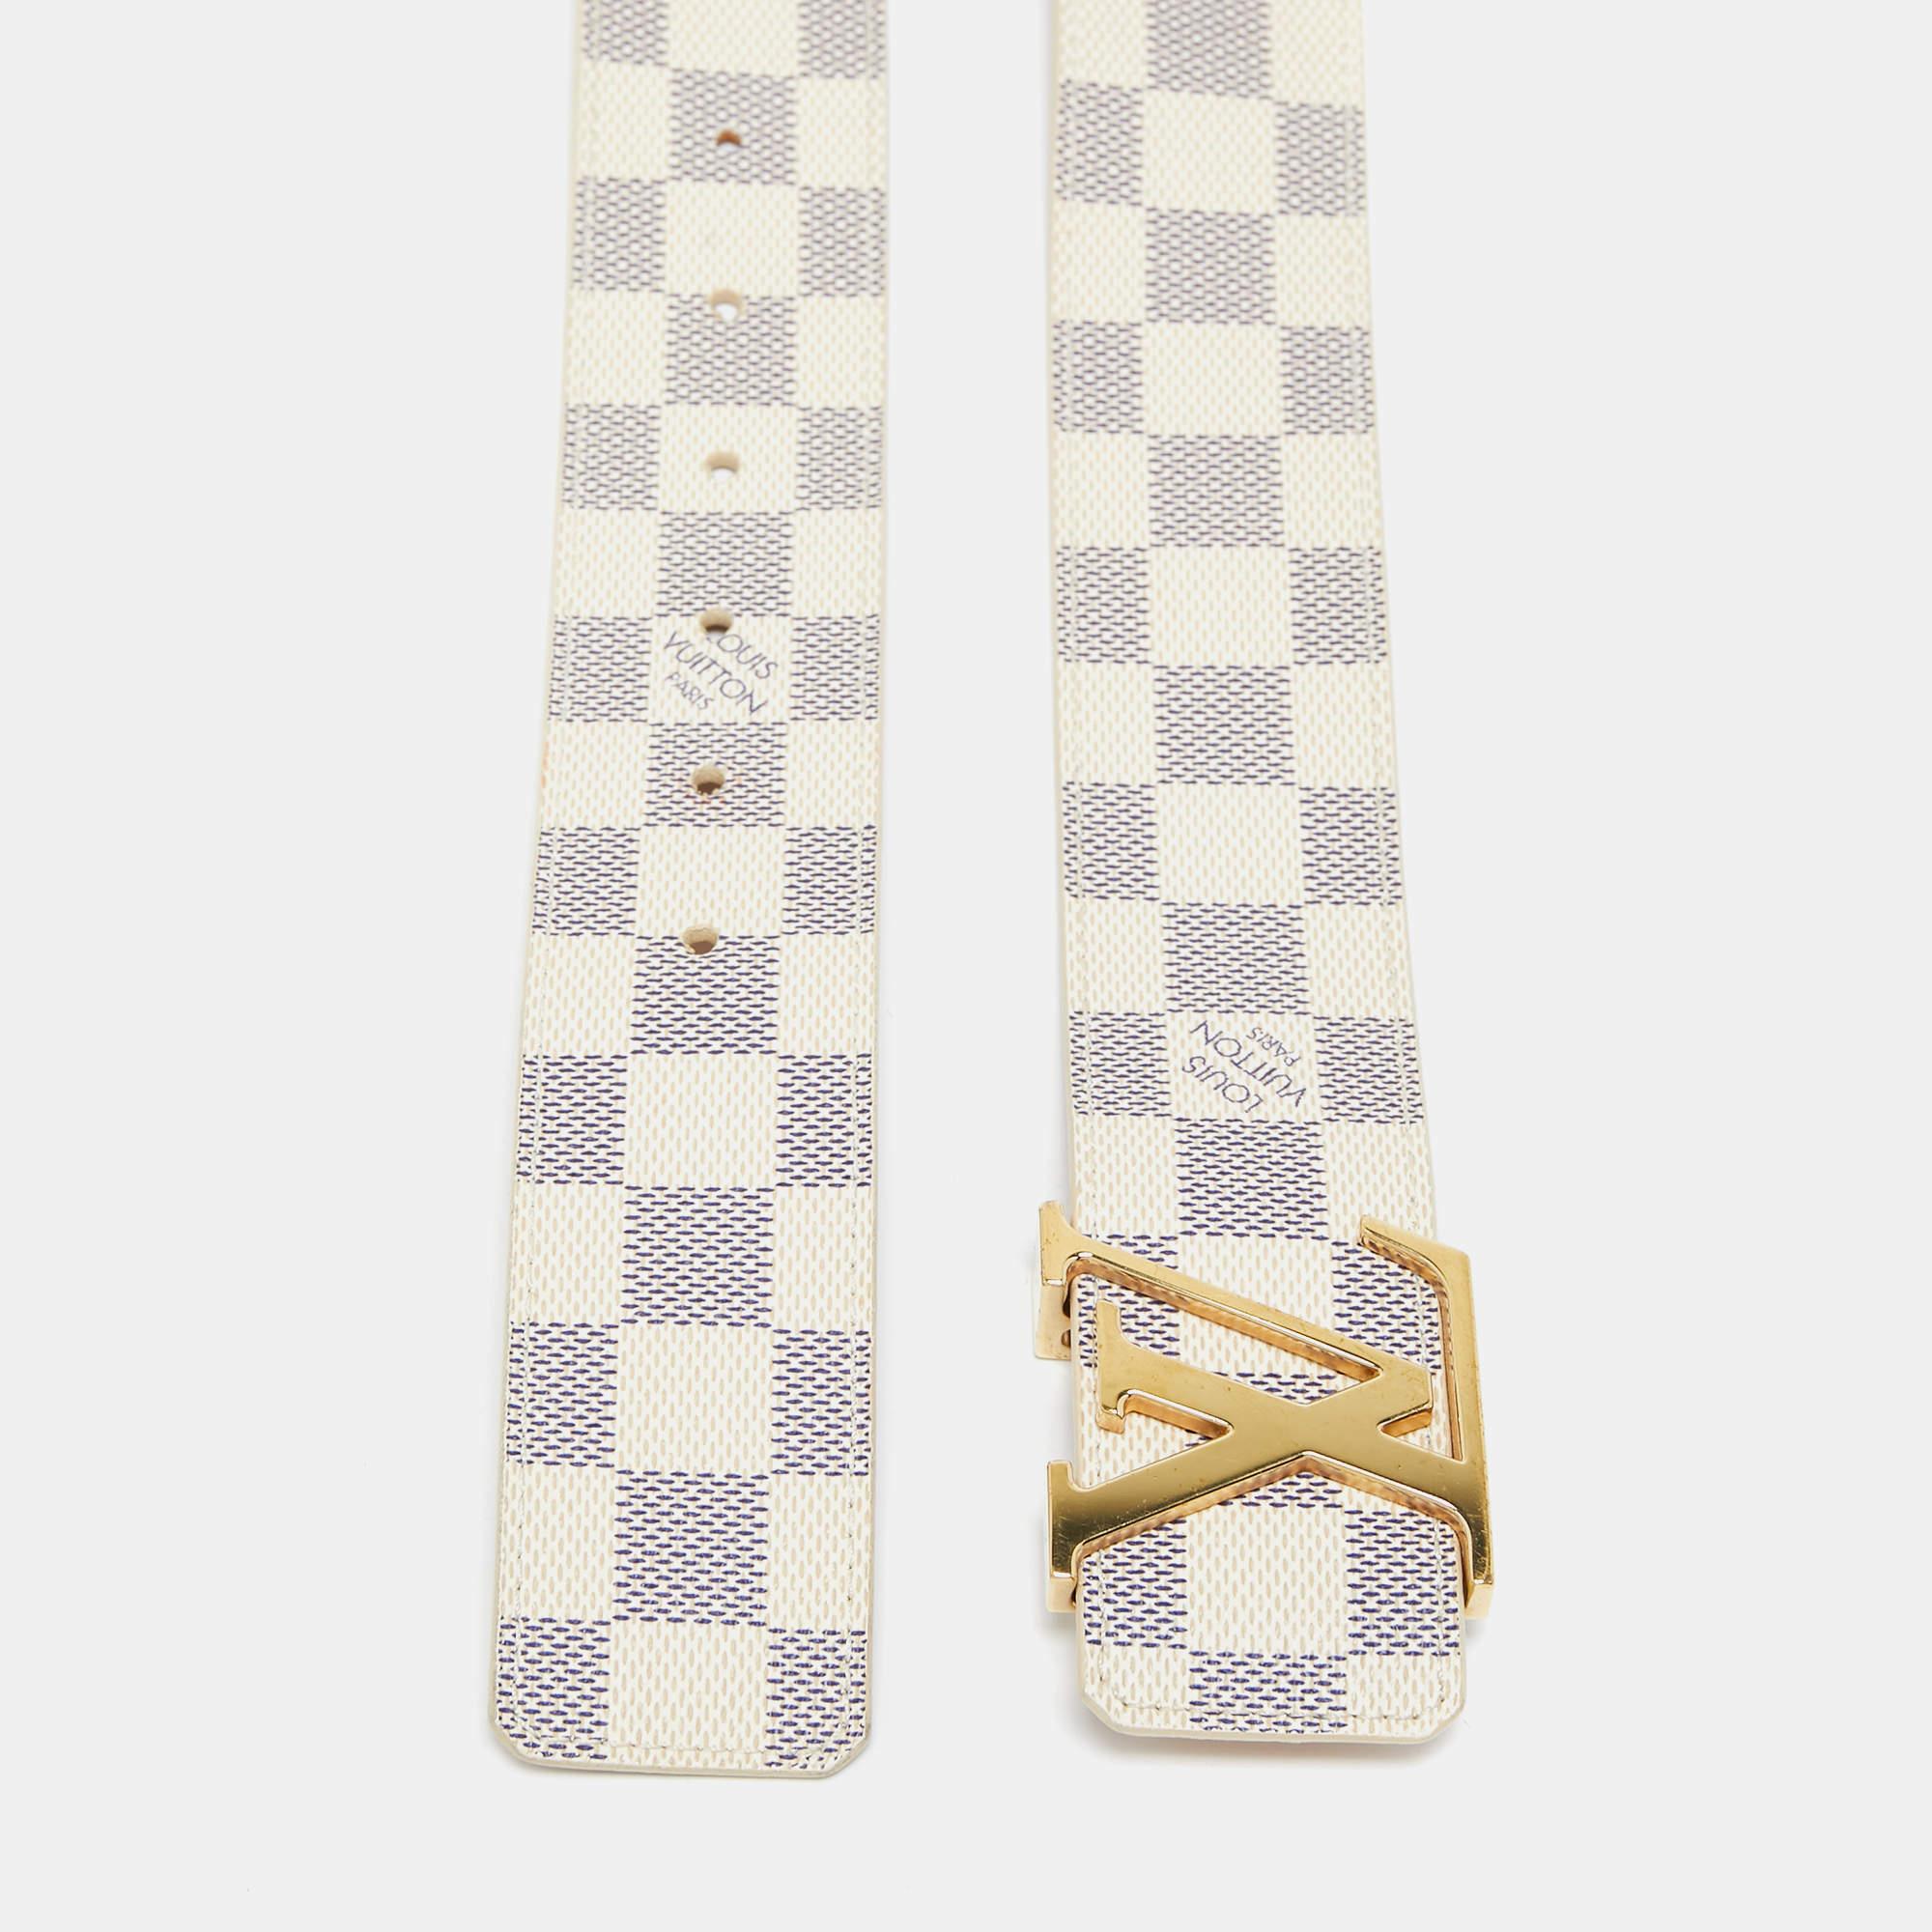 Add a sleek finish to your OOTD with this Louis Vuitton Initiales belt. It is carefully crafted to last well and boost your style for a long time.

